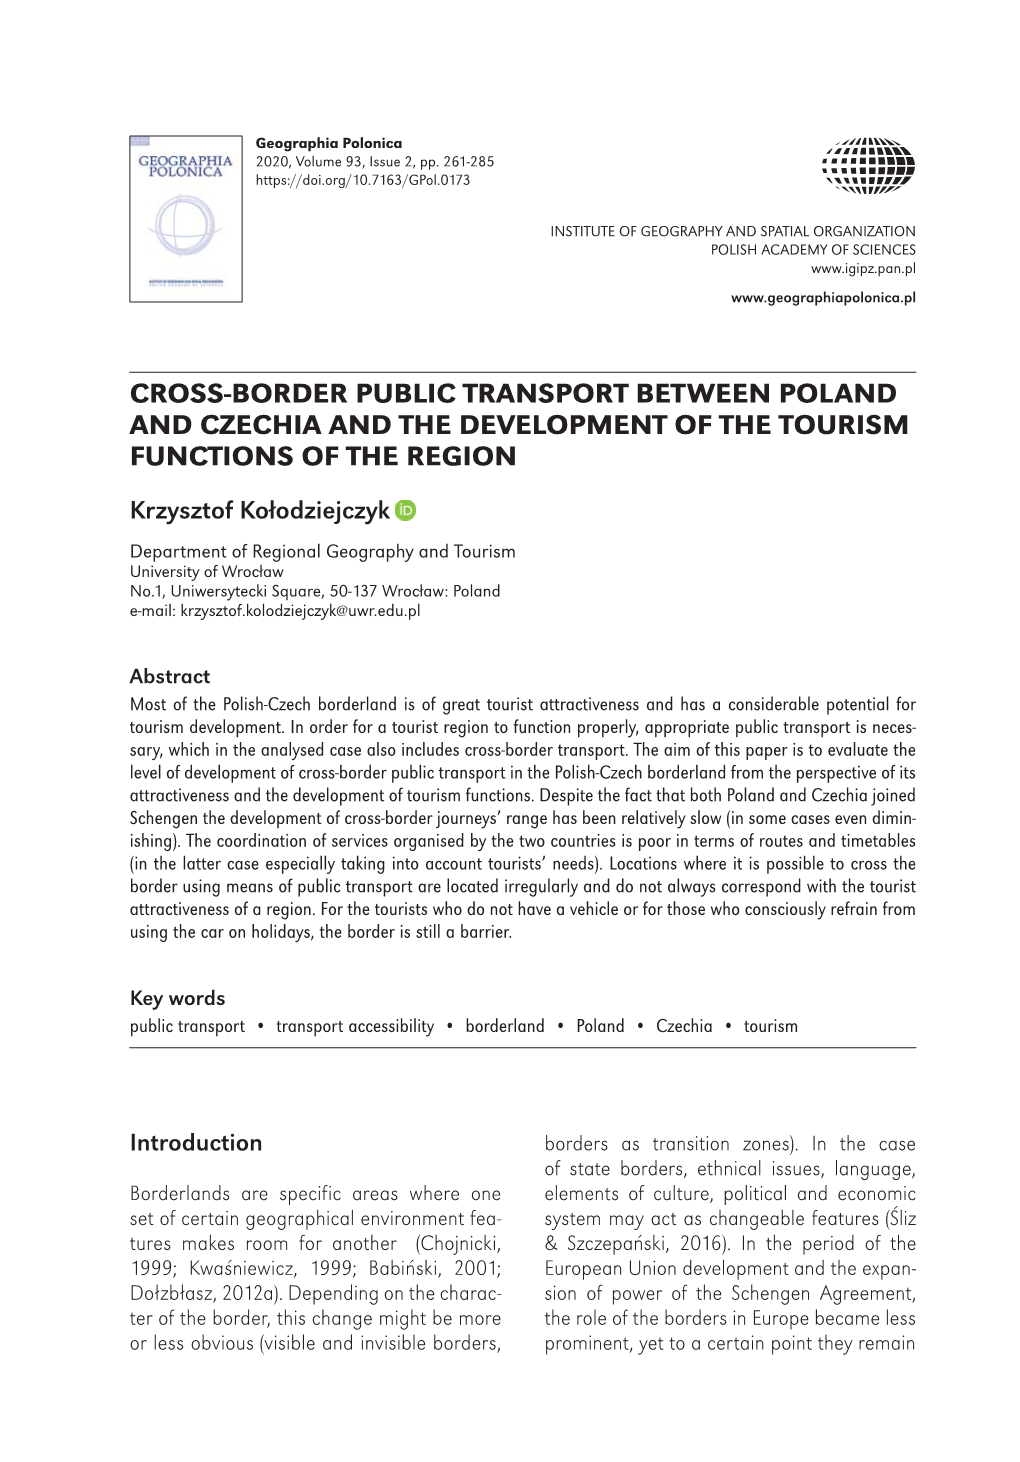 Cross-Border Public Transport Between Poland and Czechia and the Development of the Tourism Functions of the Region